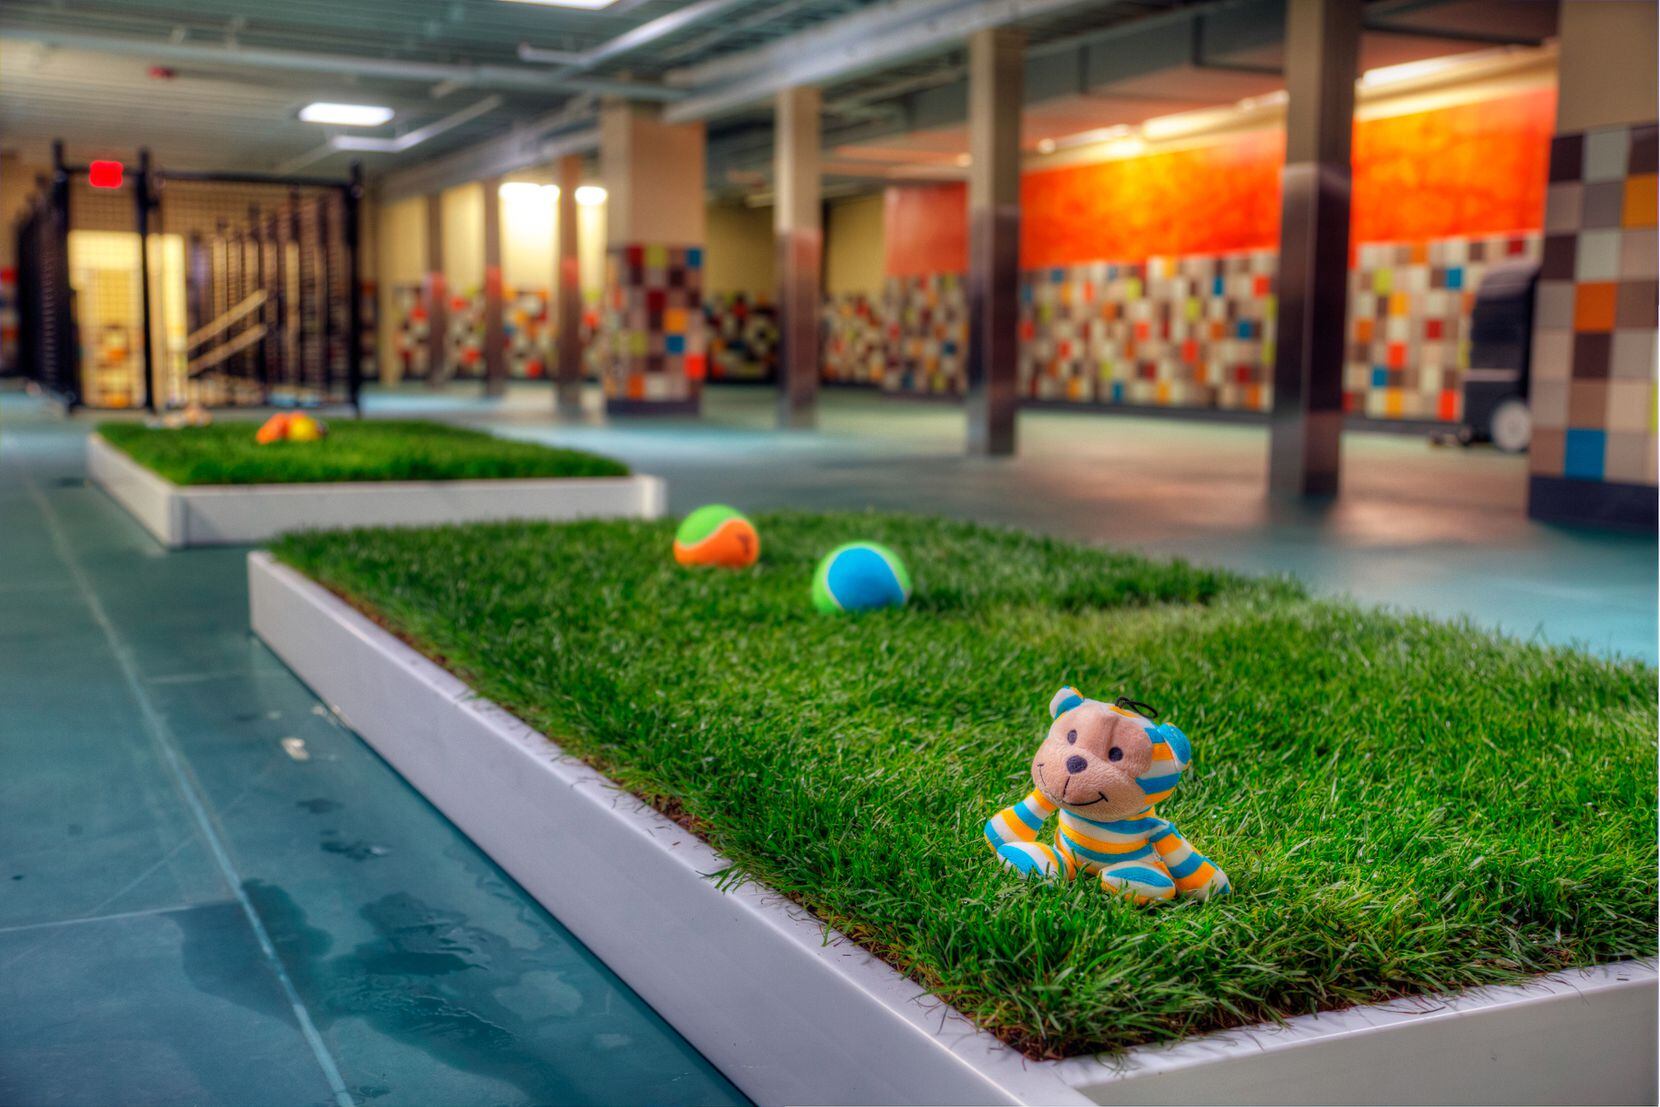 Pooch Hotel features indoor live grass for dogs to use the restroom.